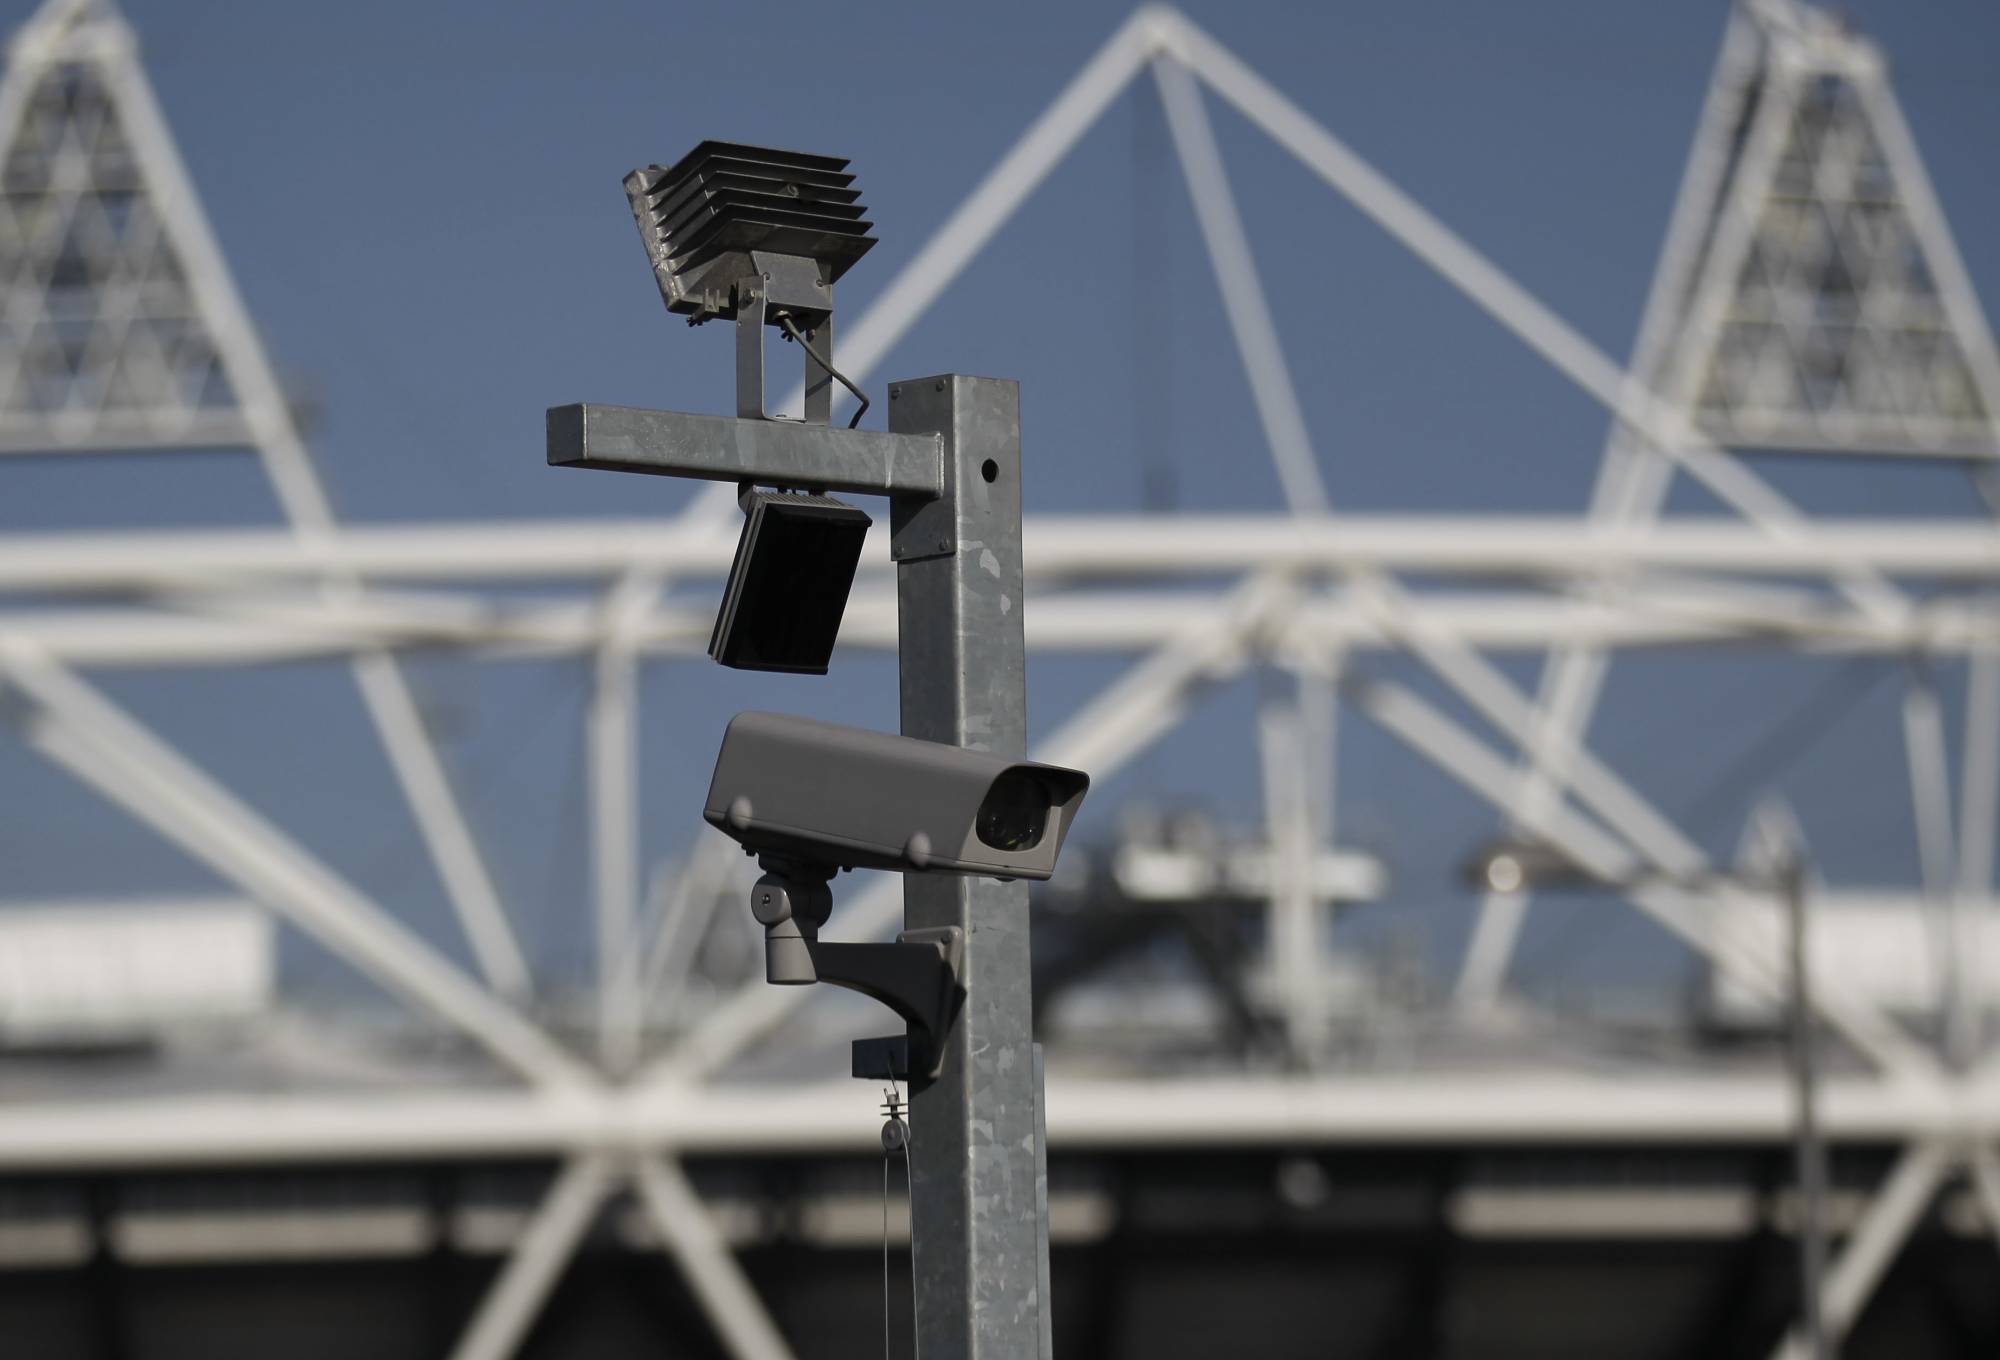 FILE - In this file photo dated Wednesday, March 28, 2012, a security cctv camera is seen by the Olympic Stadium at the Olympic Park in London.  The South Wales police deployed facial recognition surveillance equipment on Sunday Jan. 12, 2020, in a test to monitor crowds arriving for a weekend soccer match in real-time, that is prompting public debate about possible aggressive uses of facial recognition in Western democracies, raising questions about human rights and how the technology may enter people's daily lives in the future.  (AP Photo/Sang Tan, FILE)